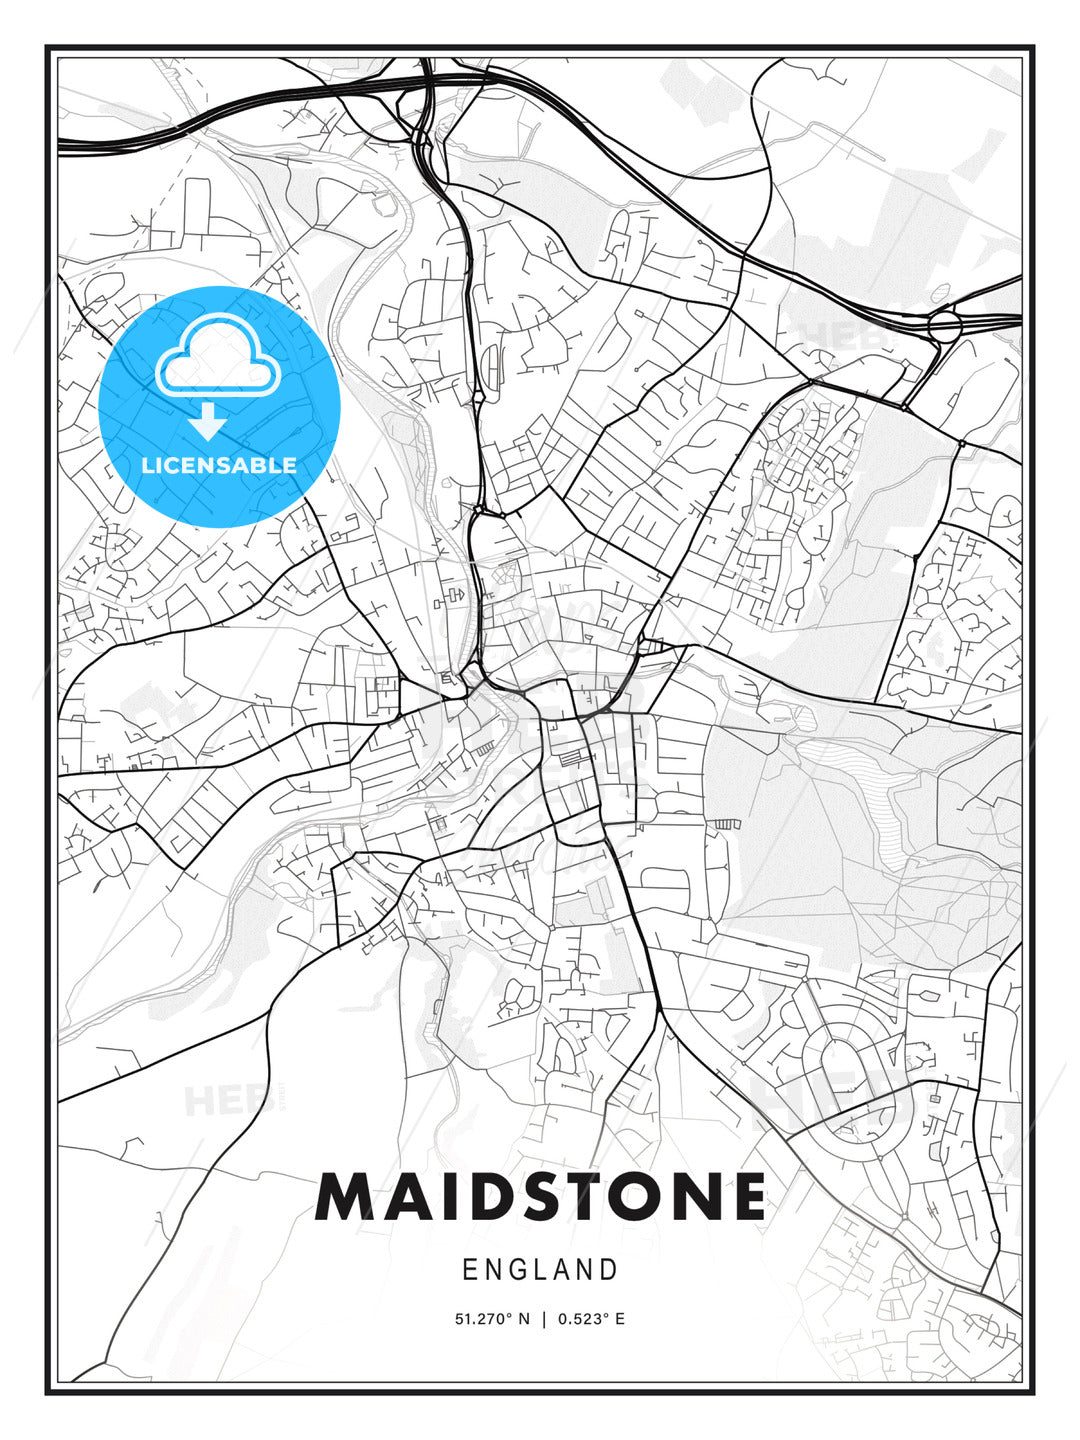 Maidstone, England, Modern Print Template in Various Formats - HEBSTREITS Sketches